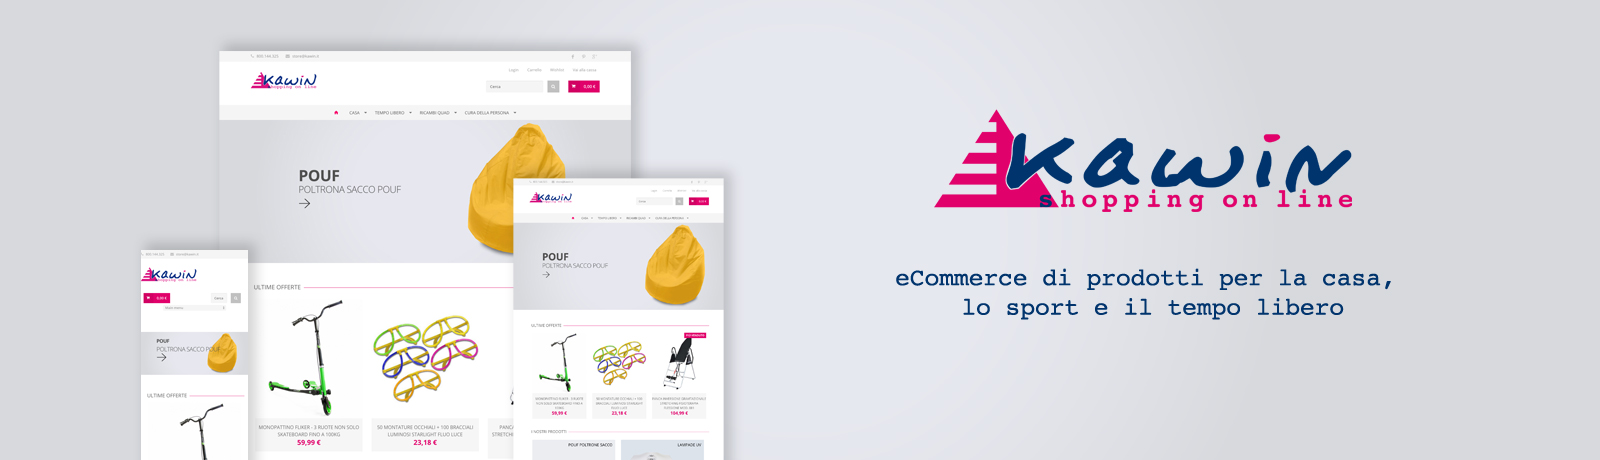 New eCommerce site for household and leisure products